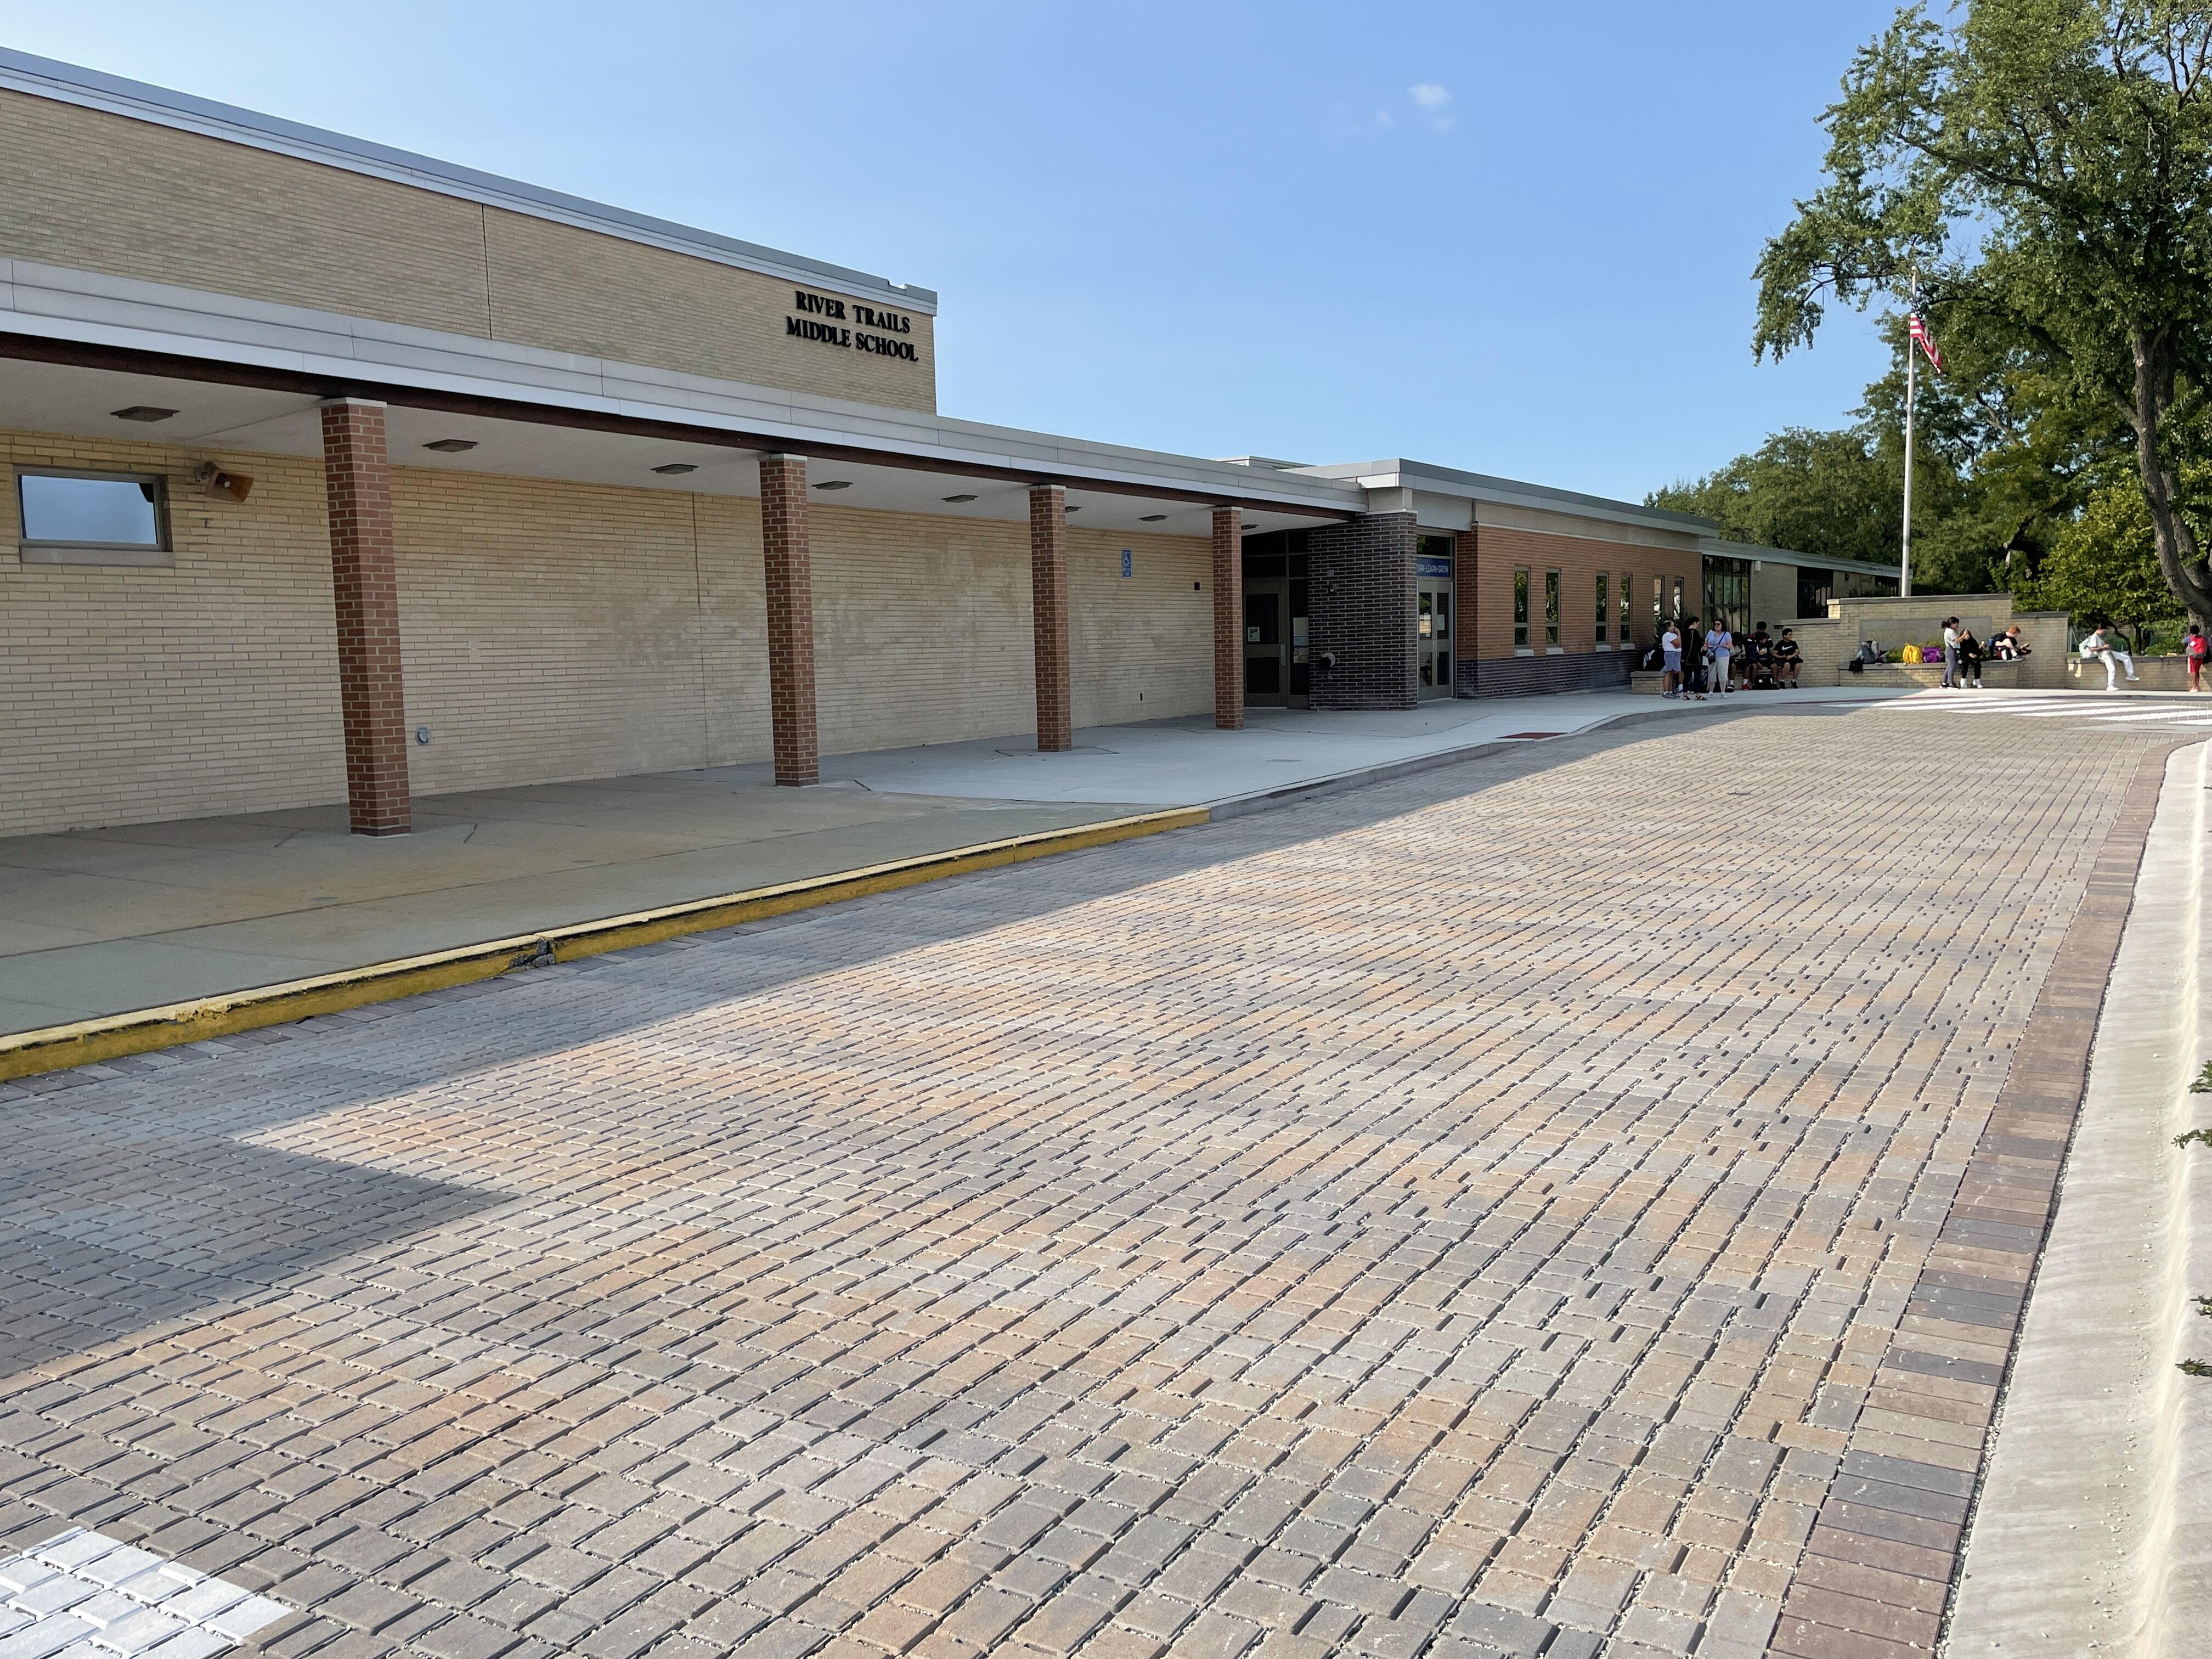 Image of bus driveway in front of River Trails Middle School